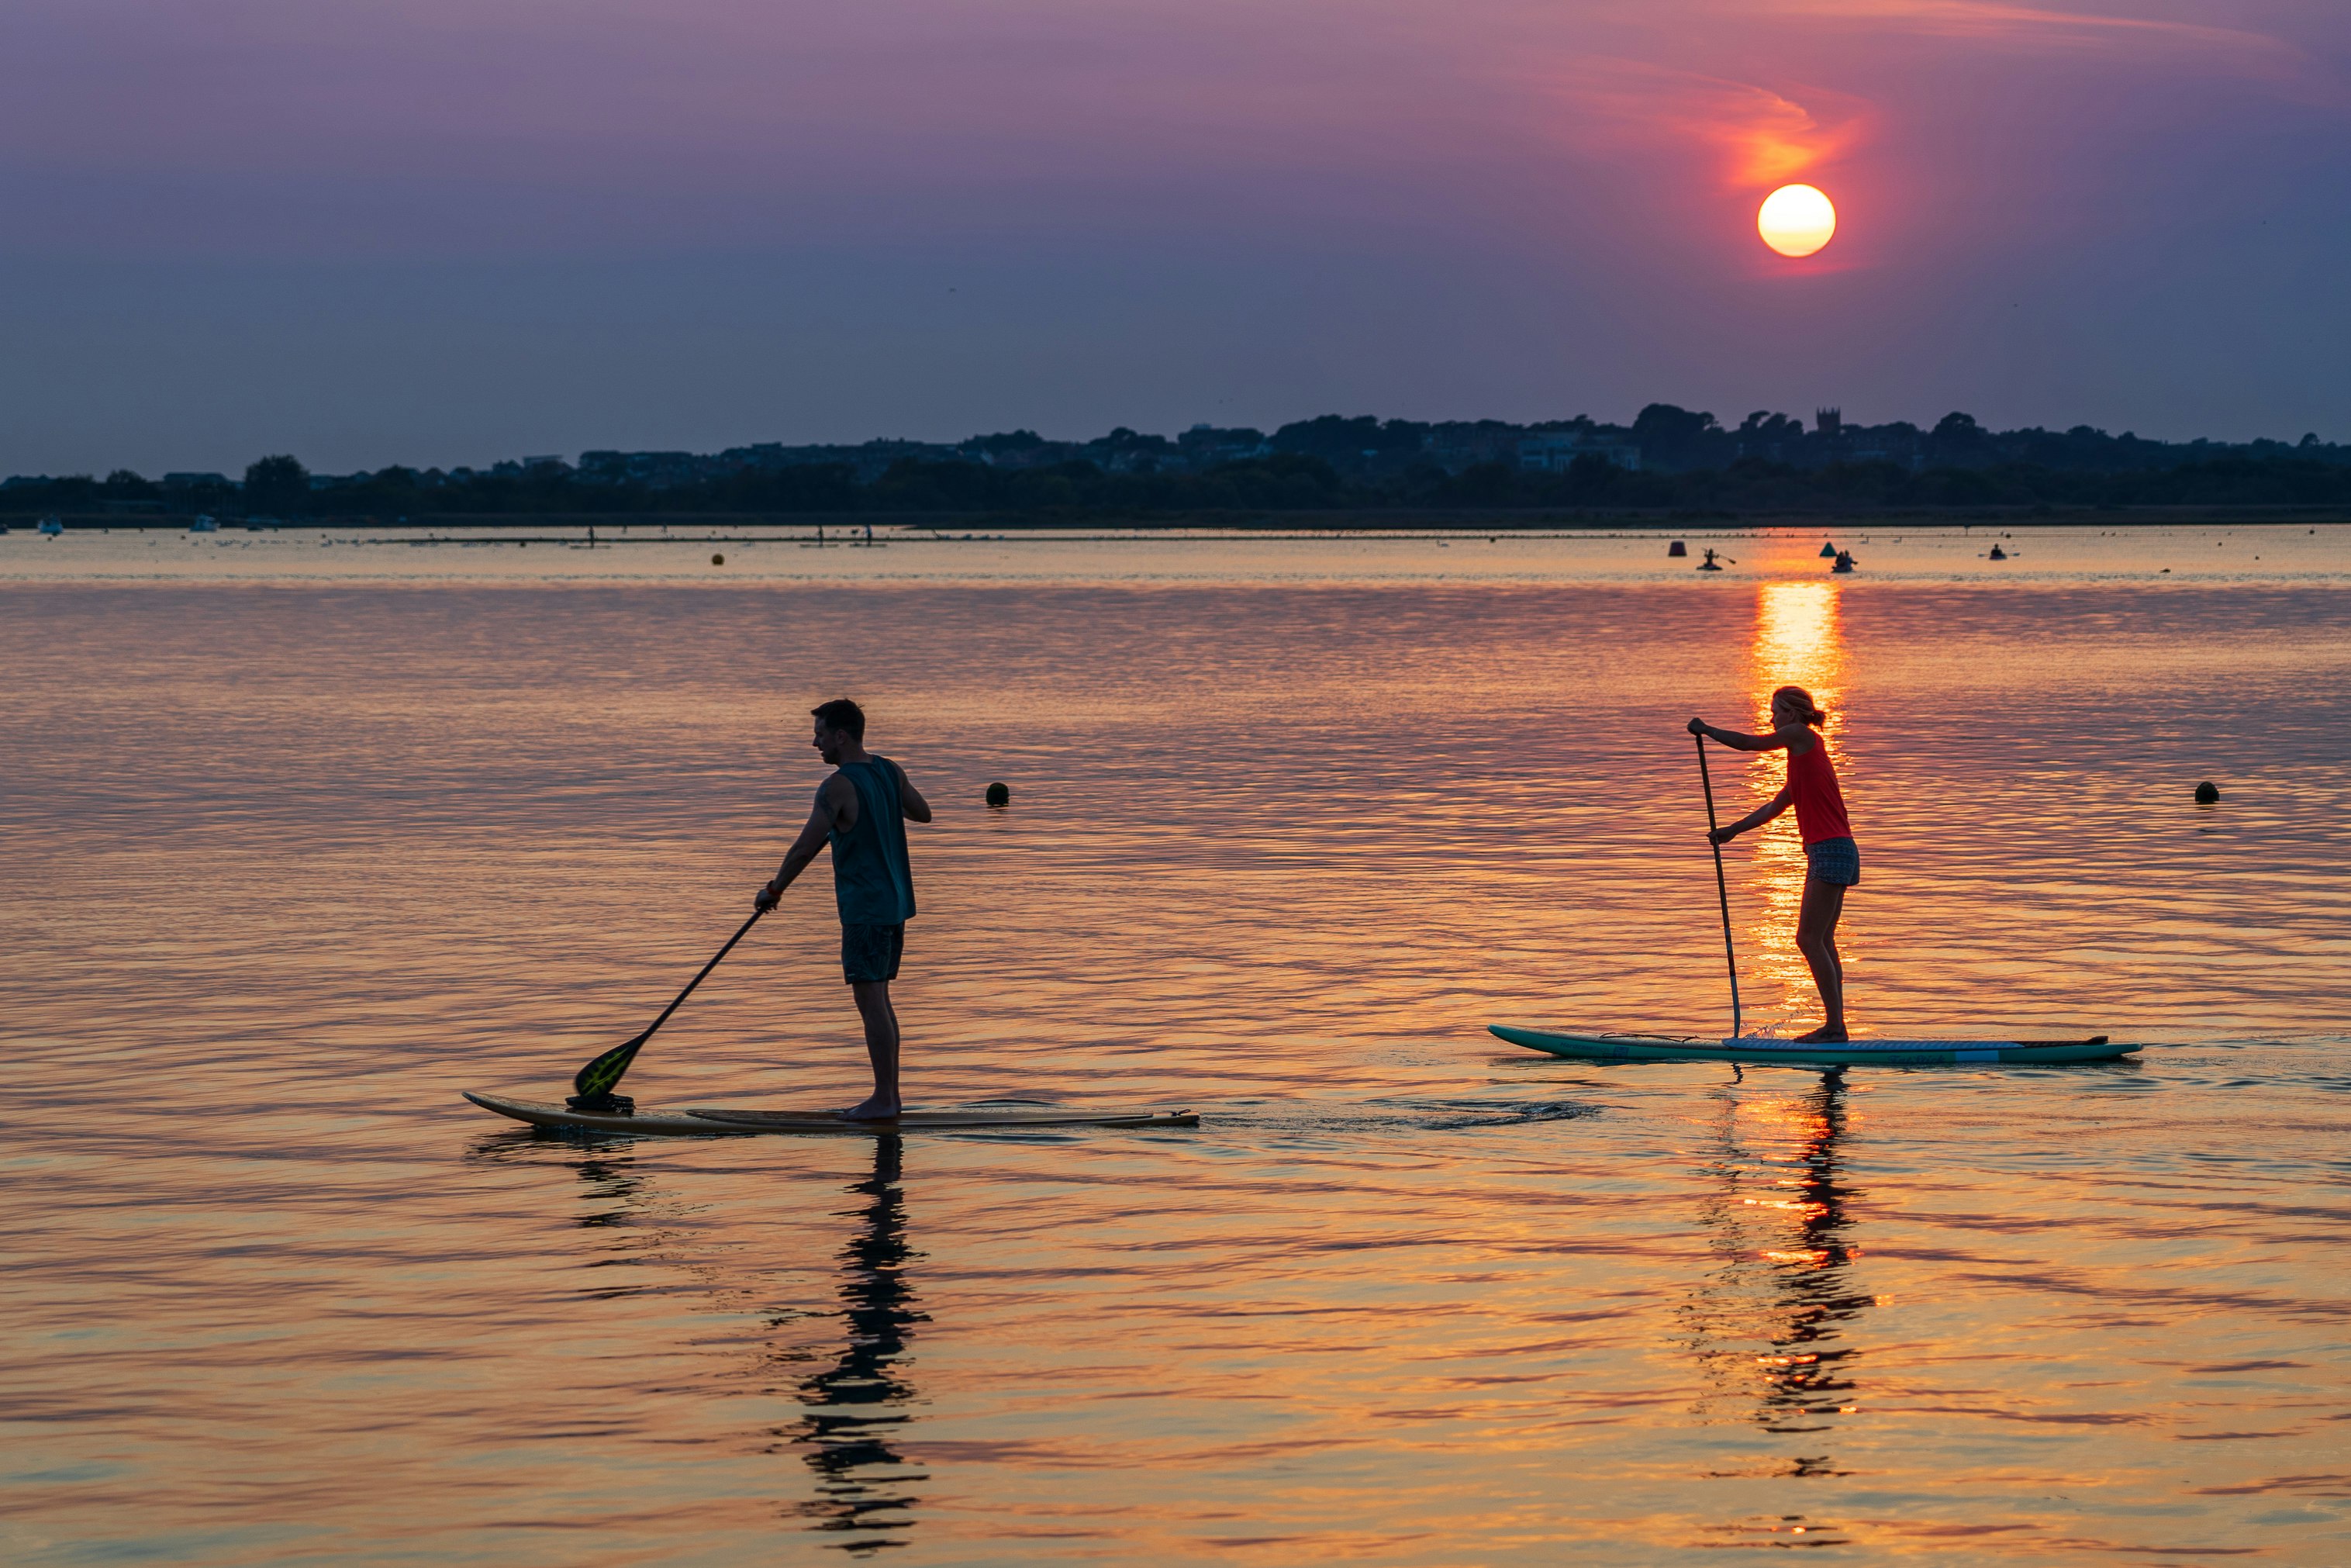 Two people paddle boarding at sunset, during the Summer, silhouetted in the golden light.